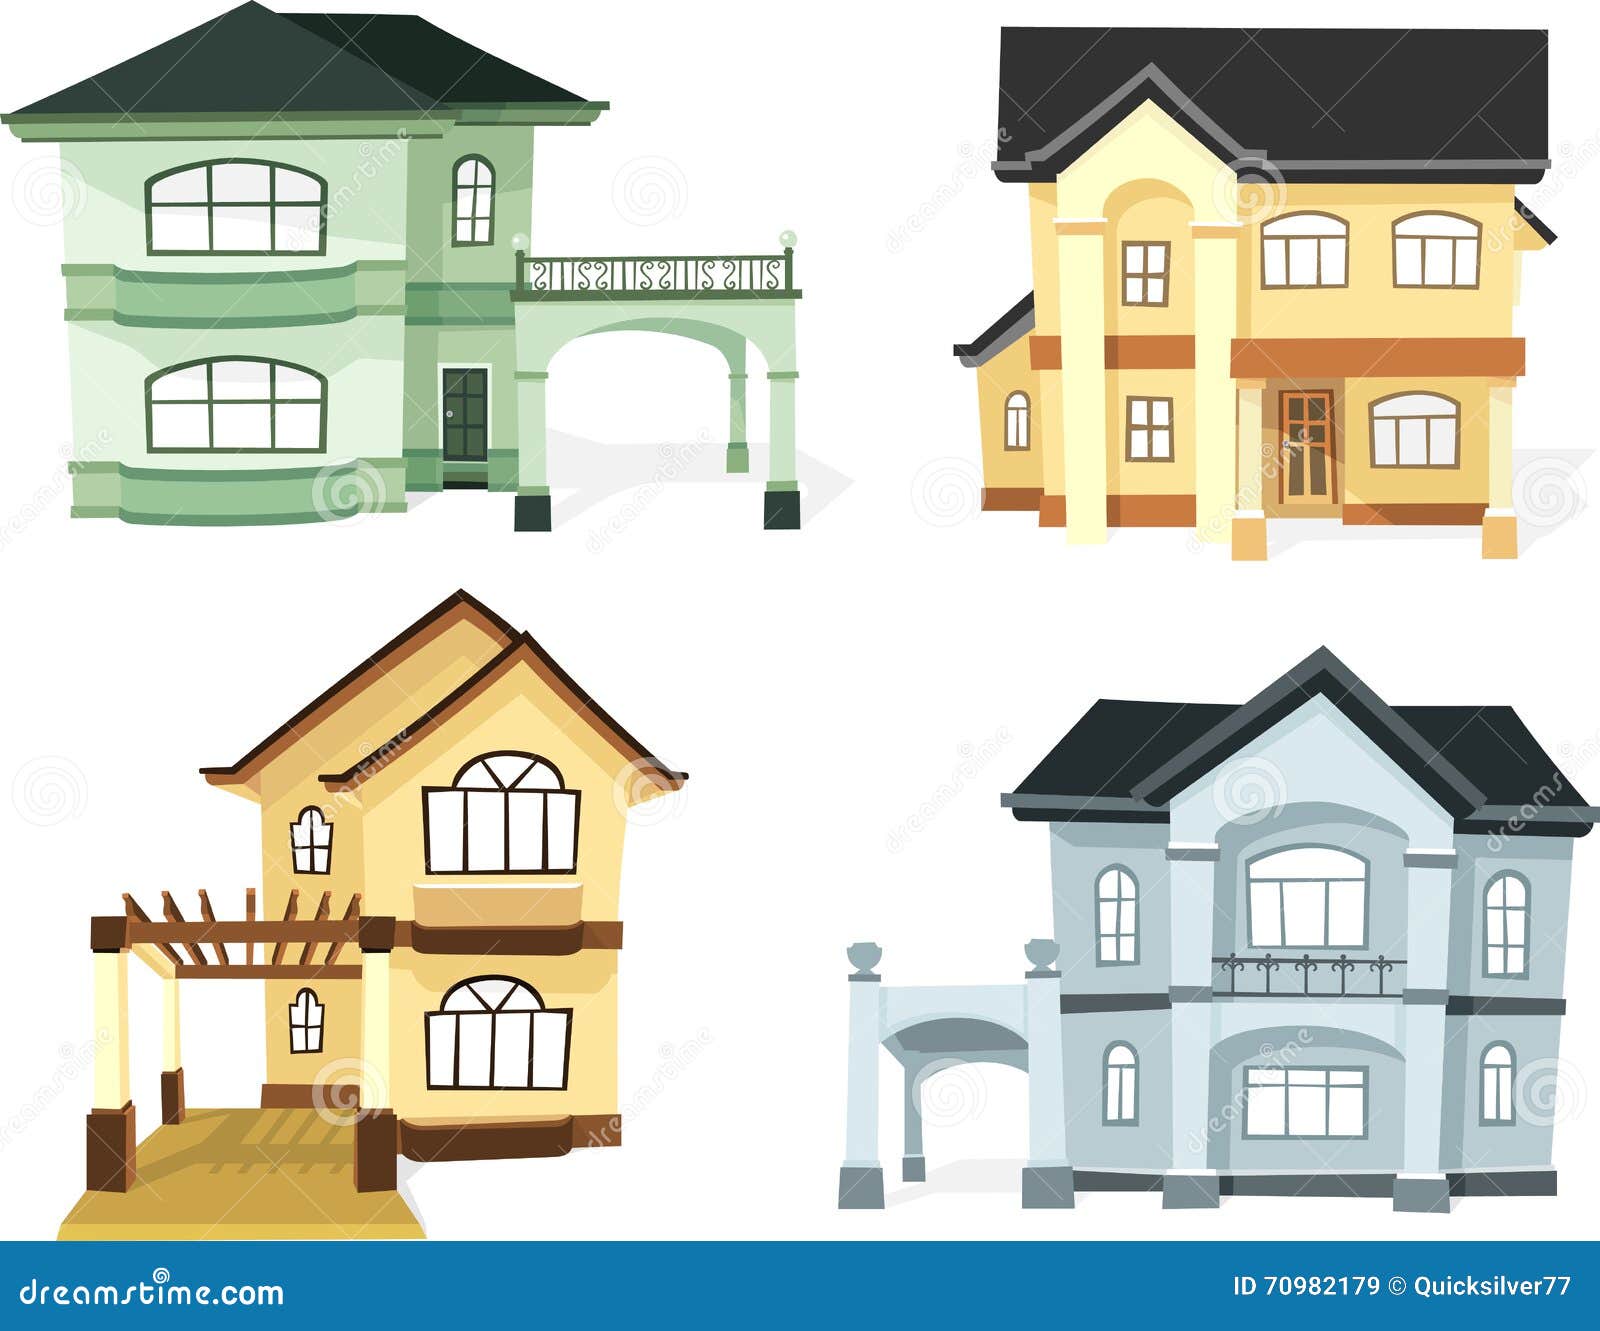 two storey house clipart - photo #12